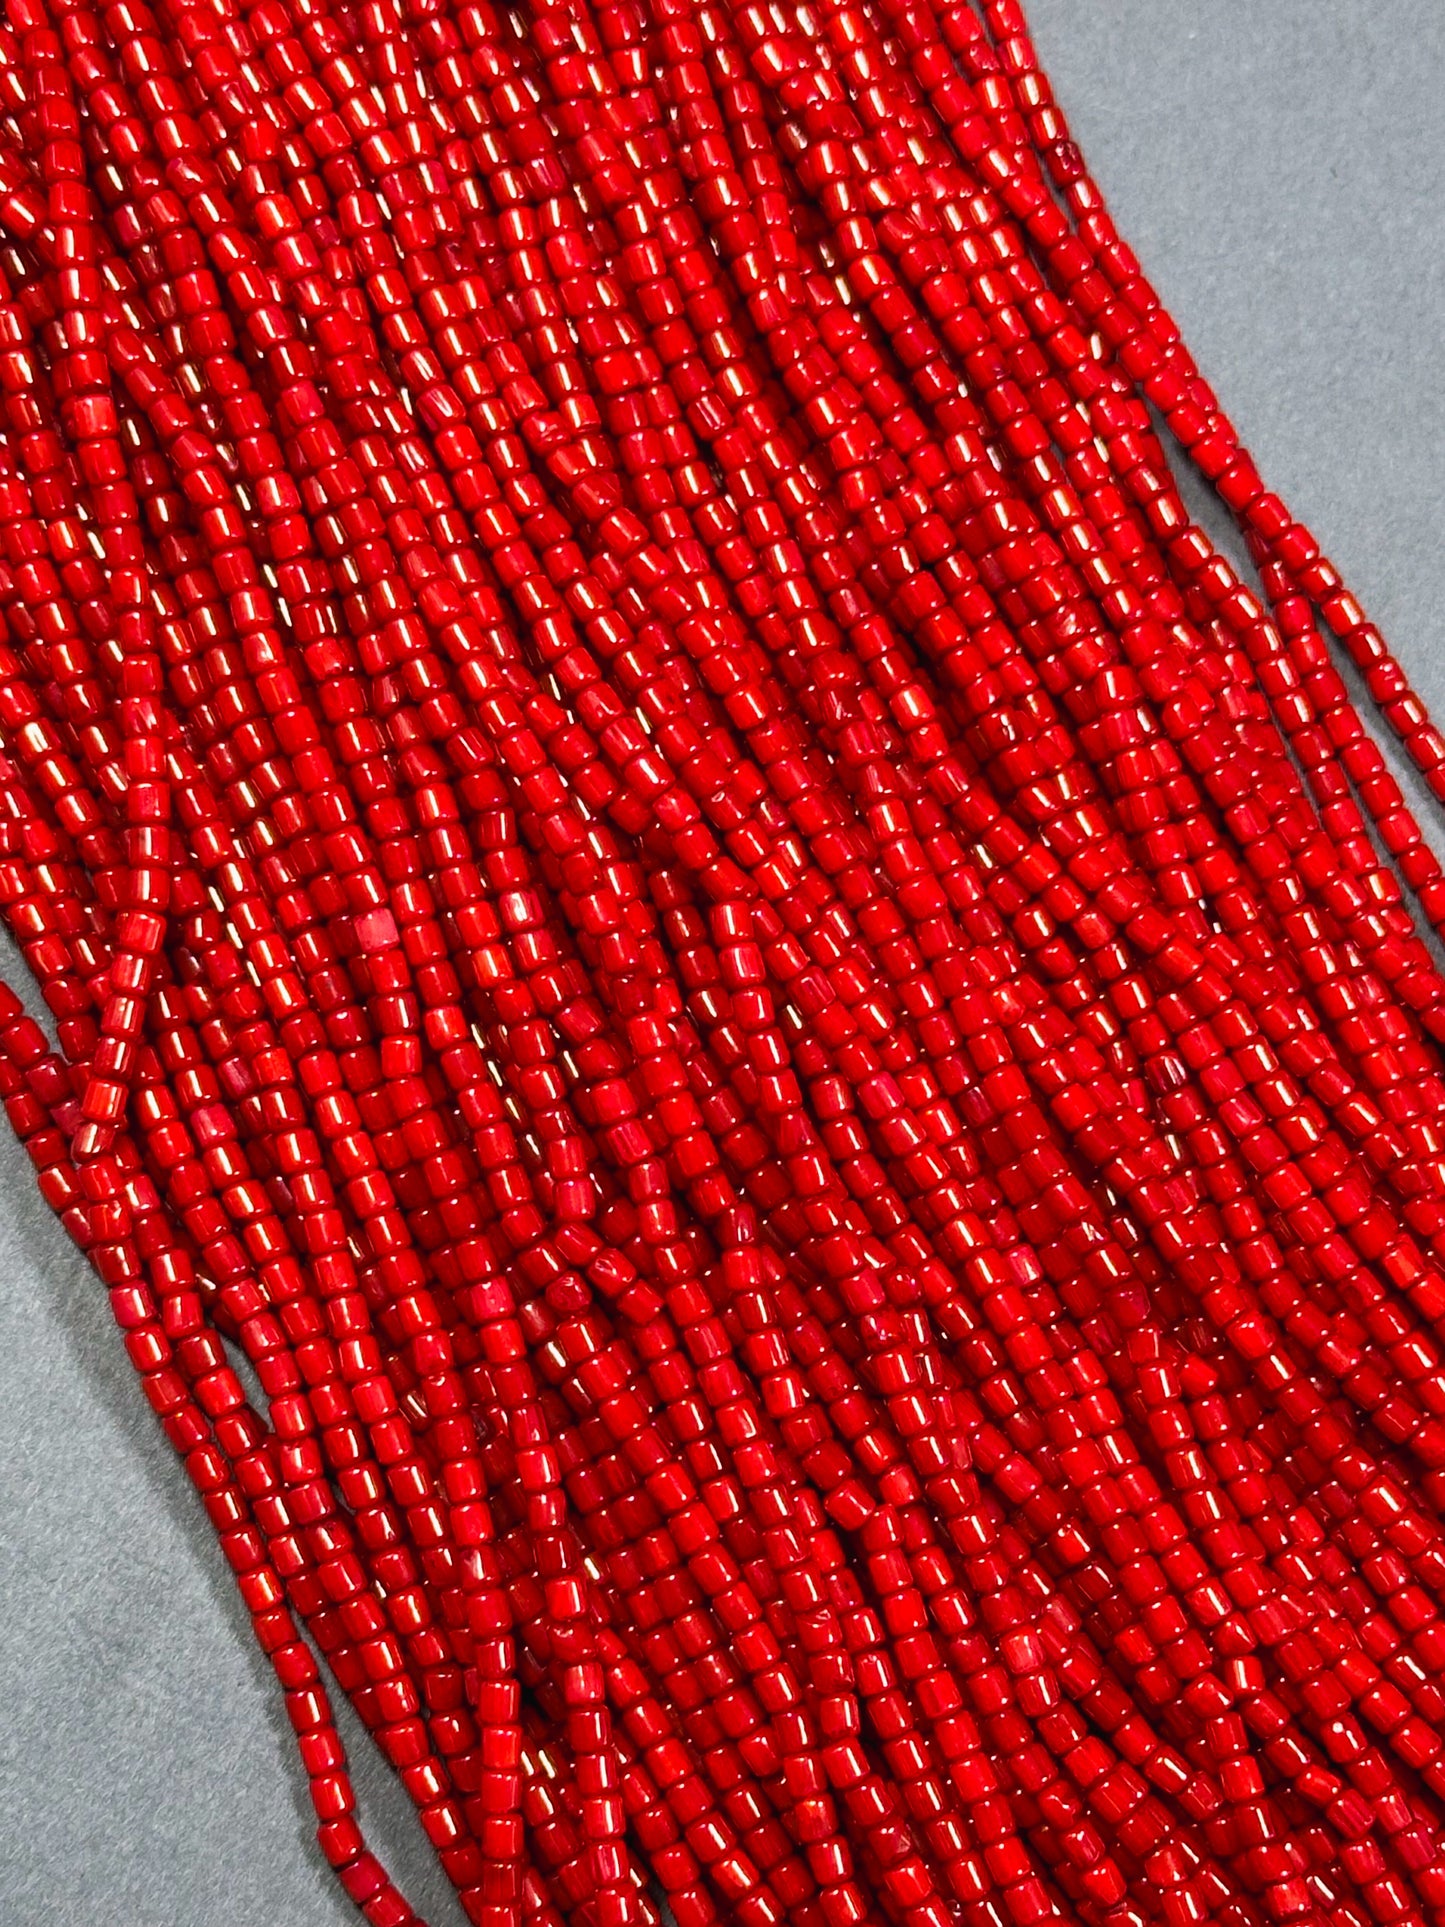 Natural Bamboo Coral Gemstone Bead 3mm Tube Shape Bead, Beautiful Natural Red Color Bamboo Coral Beads, Great Quality Full Strand 15.5"